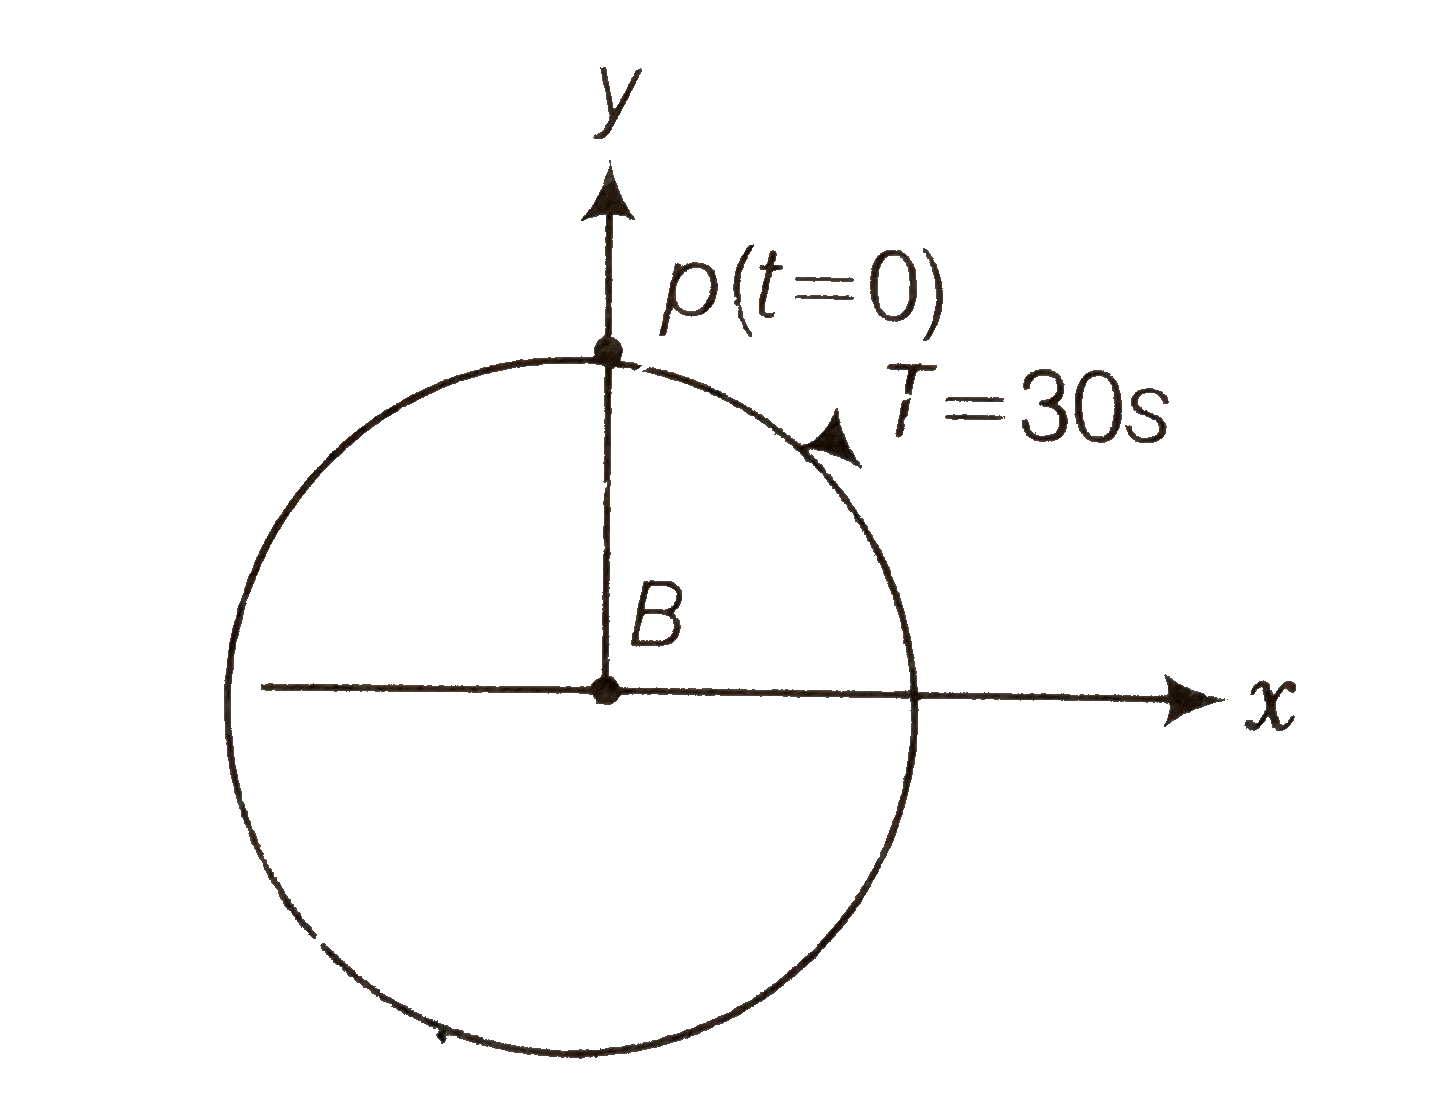 Figure shows the circular motion of a particle. The radius of the circle, the period, same of revolution and the initial position are indicated on the figure. The simple harmonic motion of the x-projection of the radius vector the rotating particle P is